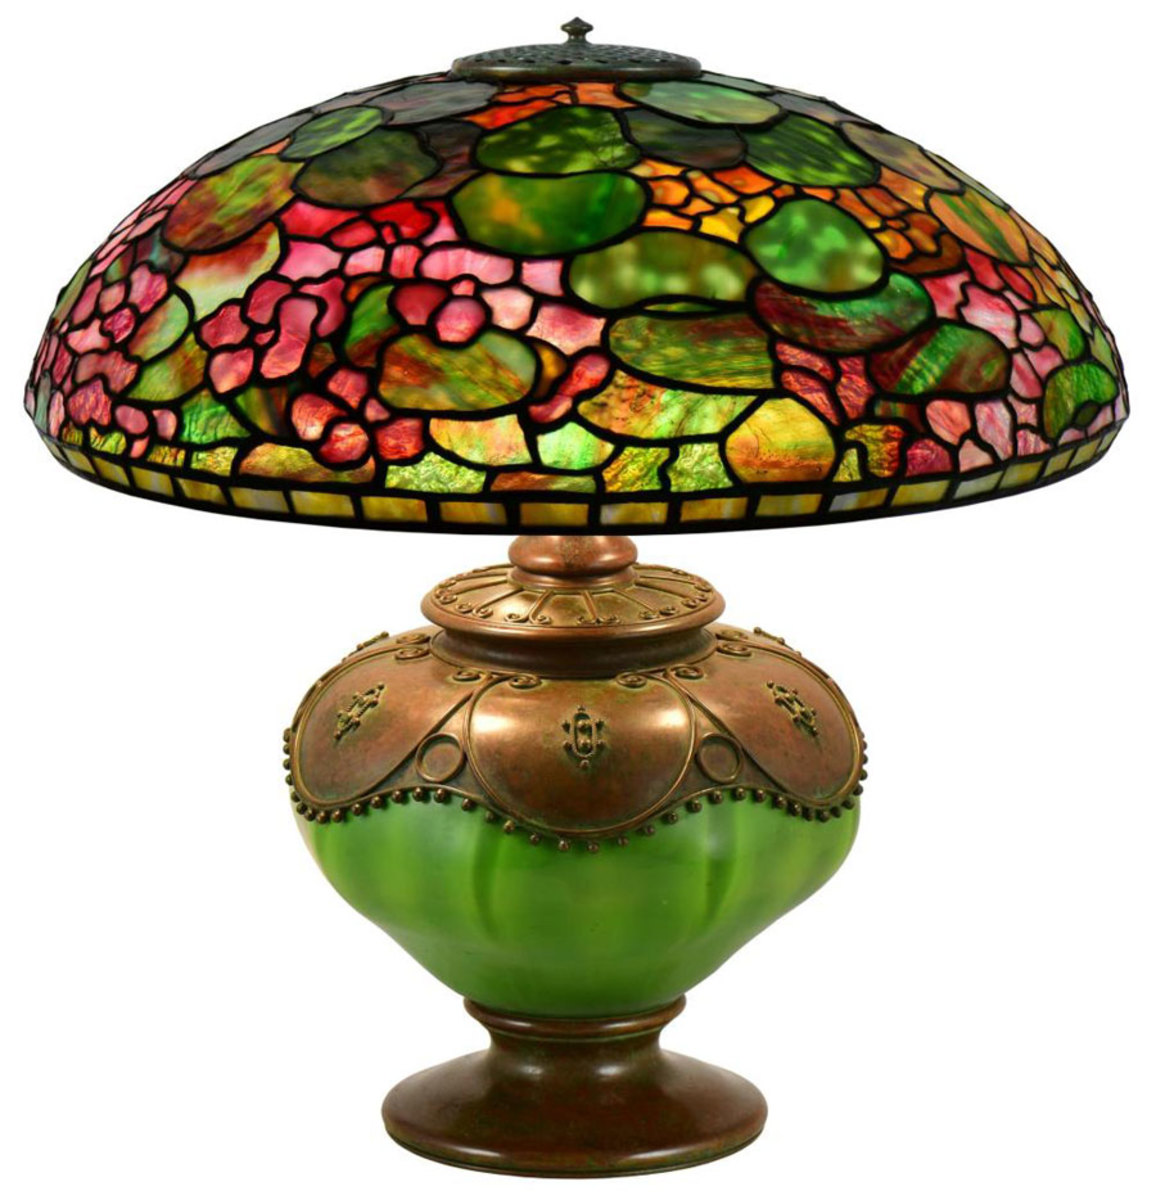 Tiffany Studios "Nasturtium" table lamp, circa 1905, leaded glass, patinated bronze shade signed twice, one being an early tag impressed "Tiffany Studios New York," oil canister impressed "Tiffany Studios, New York, 28644" with the Tiffany Glass & Decorating Company monogram, 20" h, 20" diameter (shade); estimate: $80,000-$120,000.